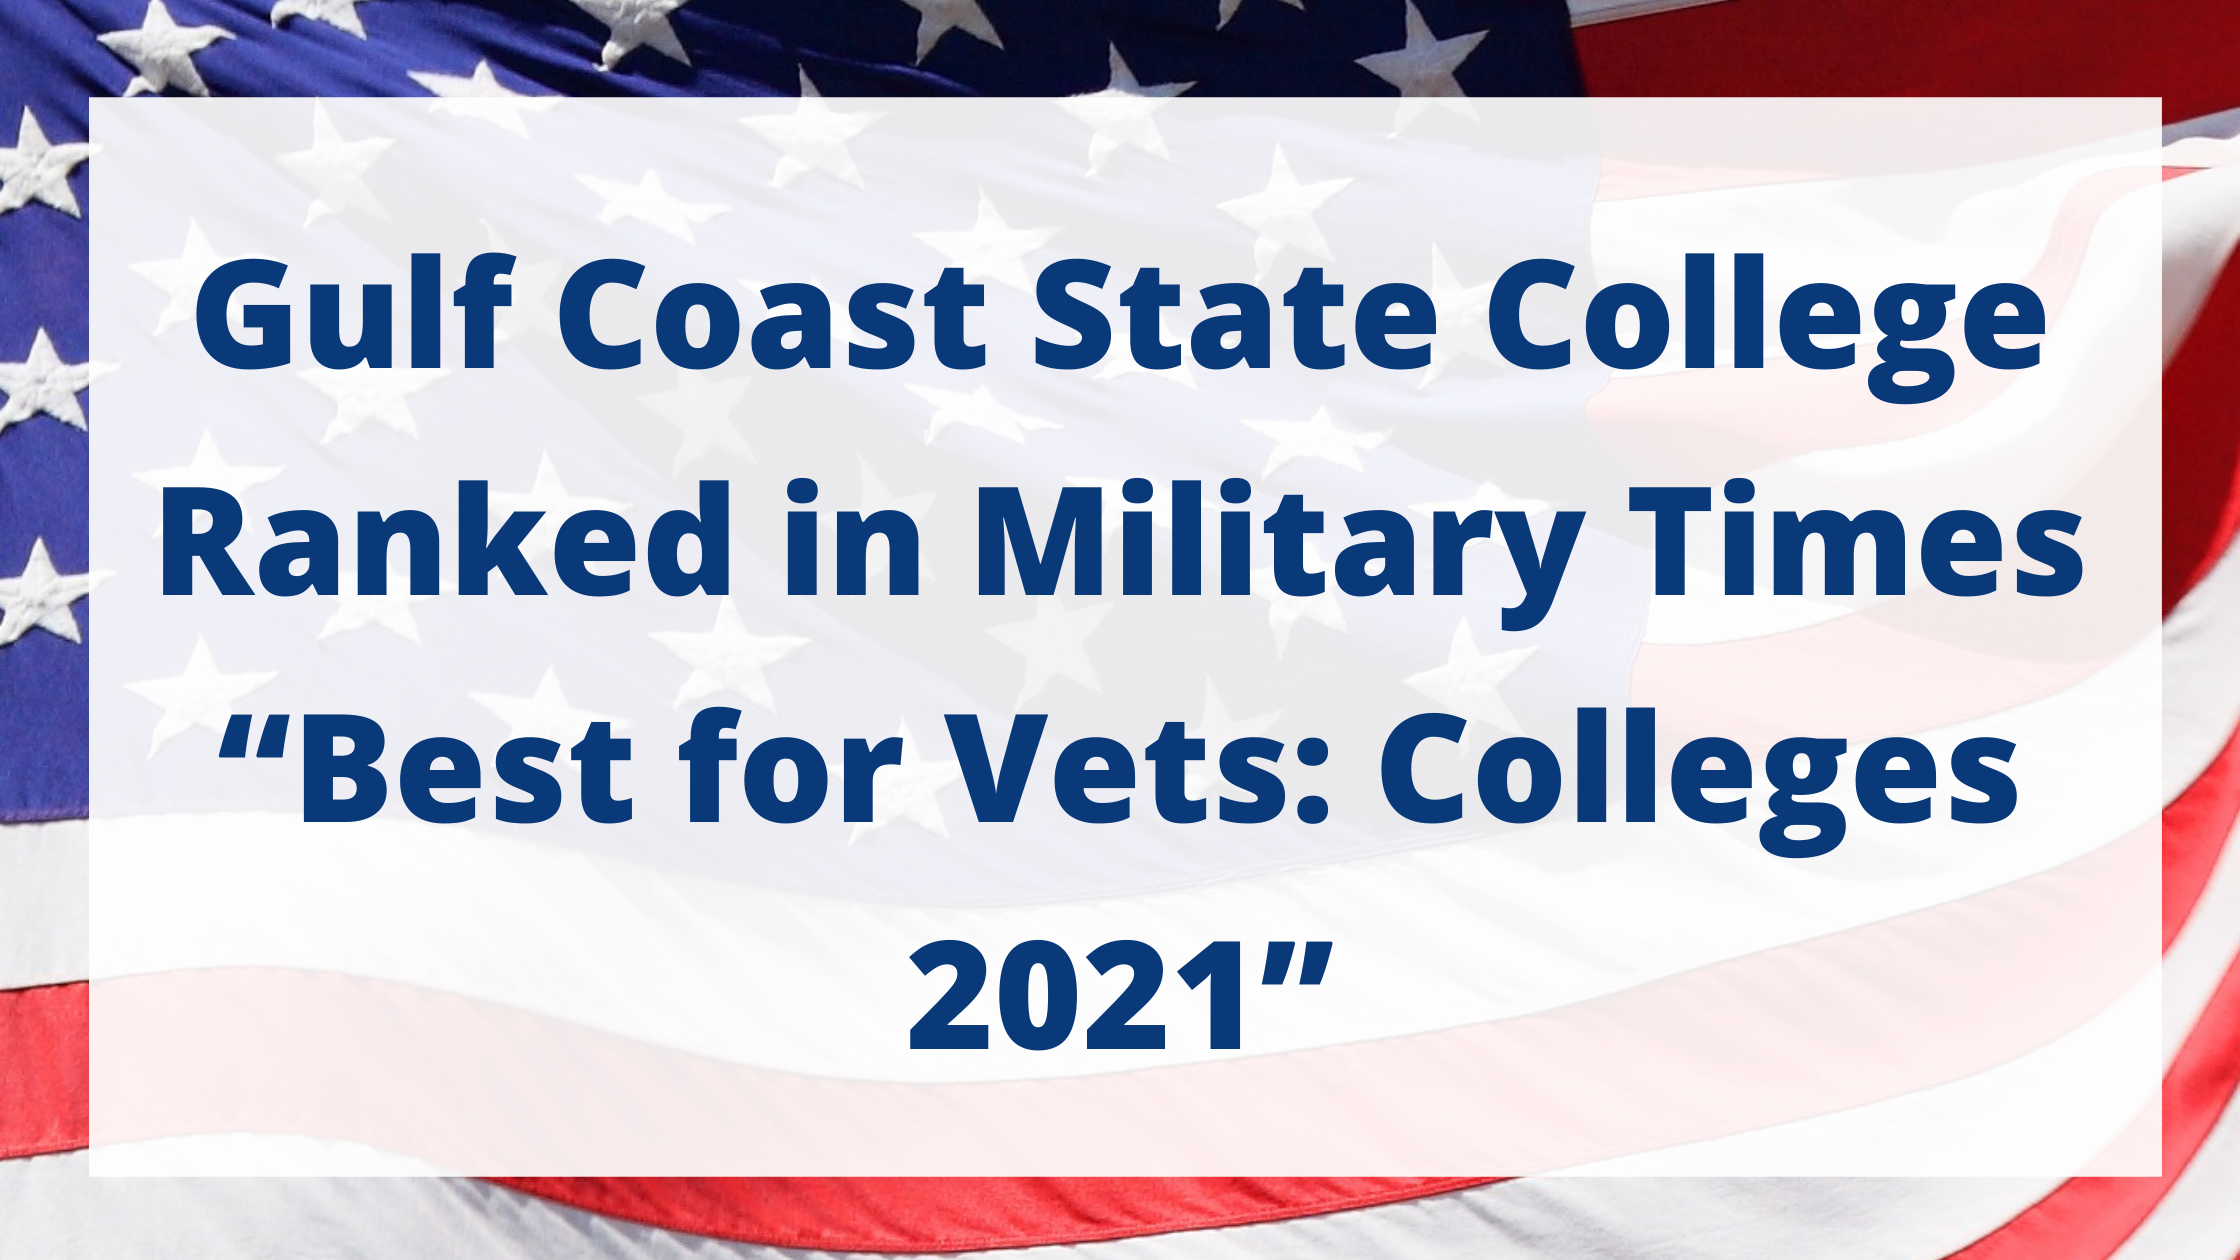 GCSC Ranked in Military Times “Best for Vets: Colleges 2021”